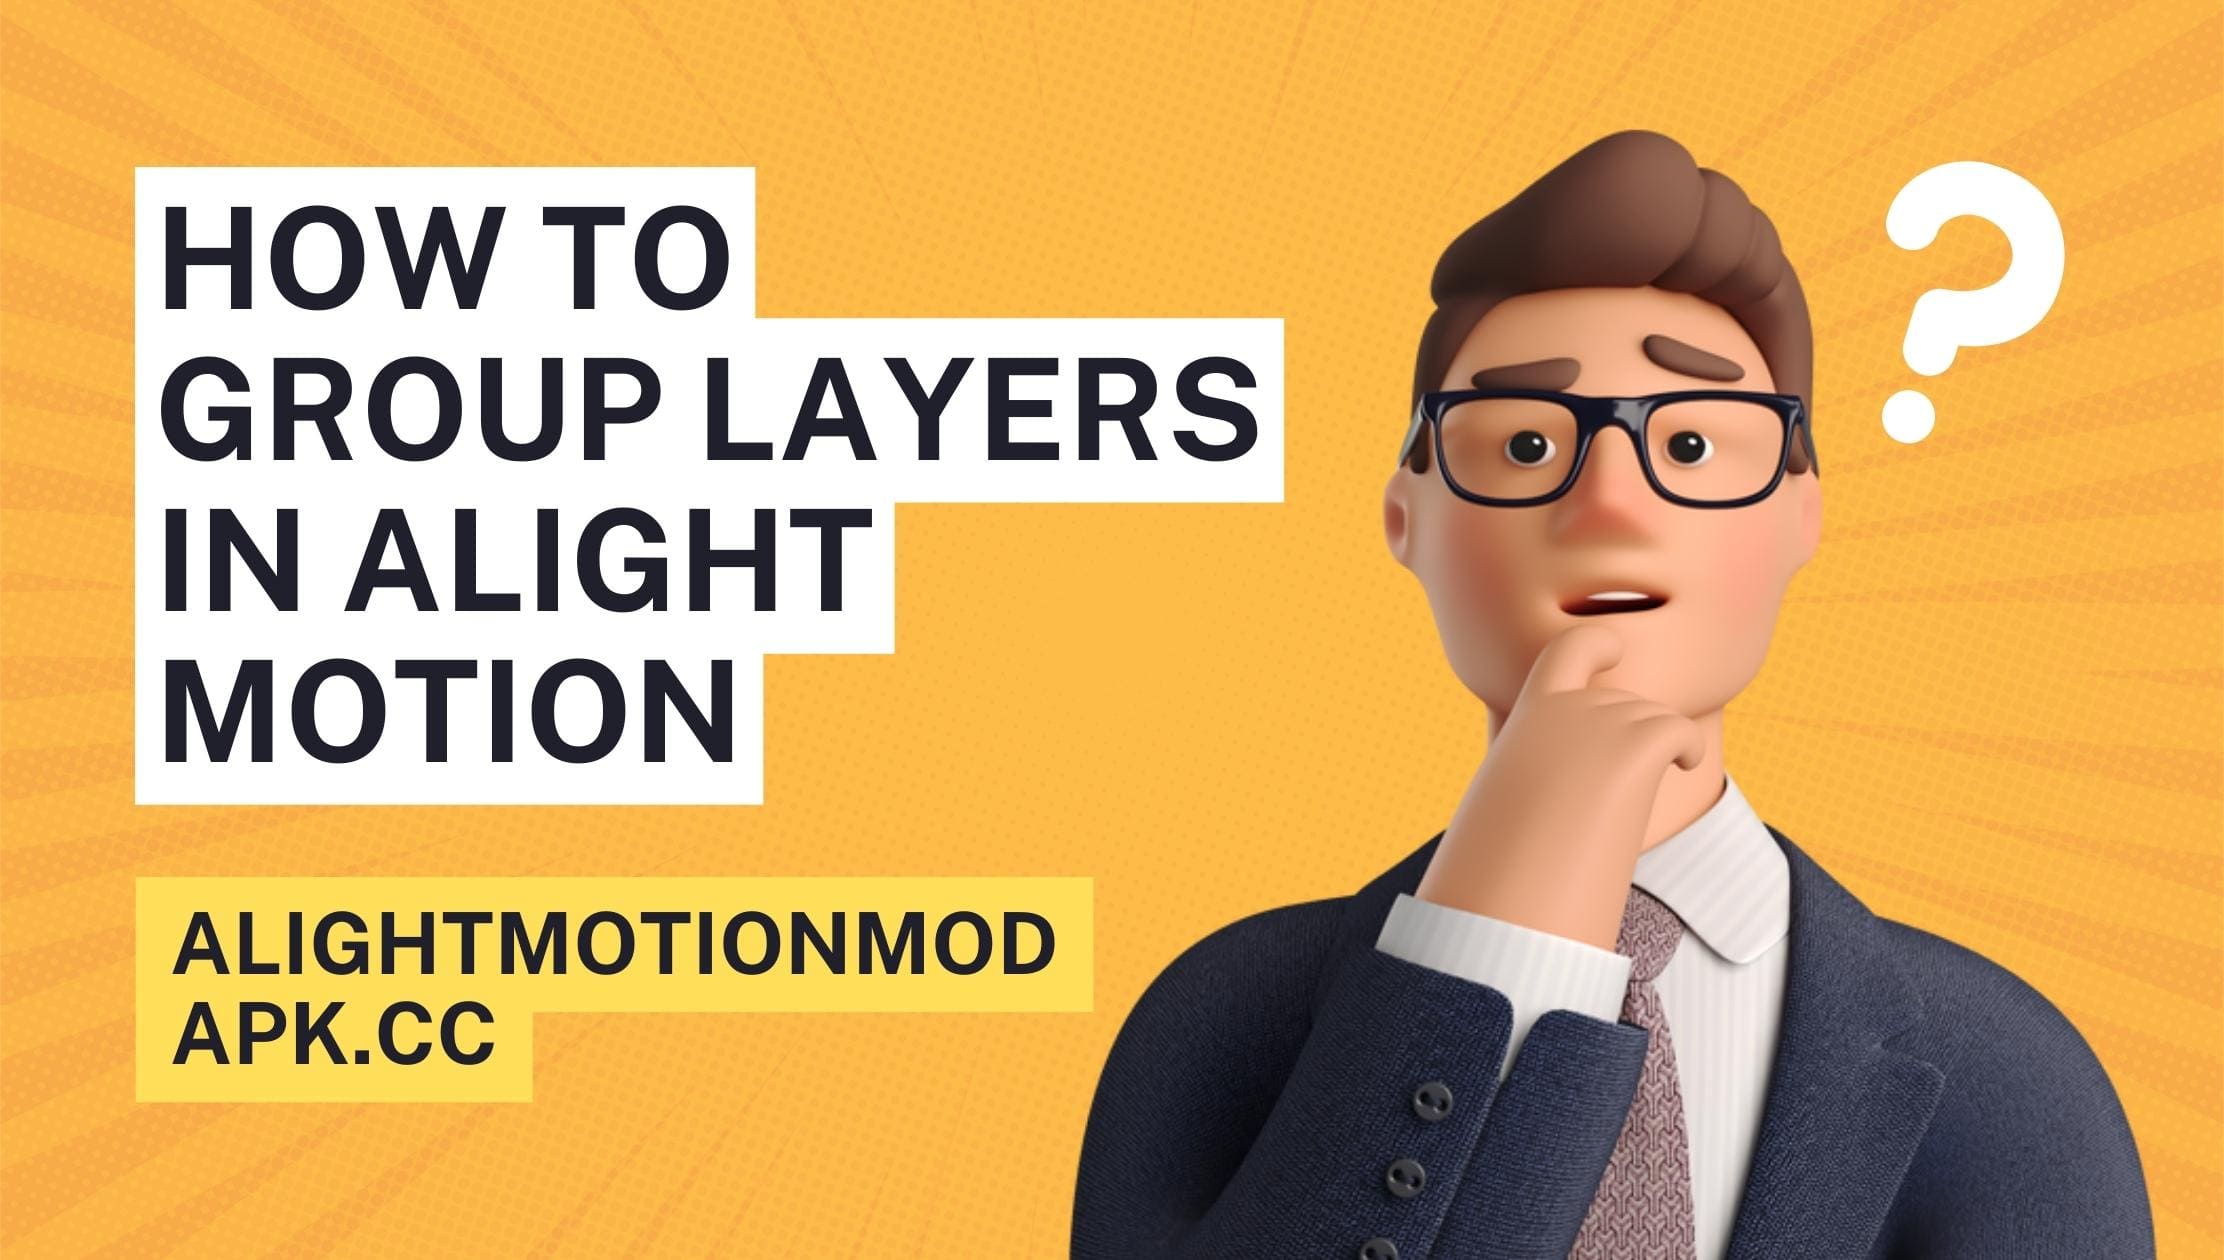 How To Group Layers in Alight Motion